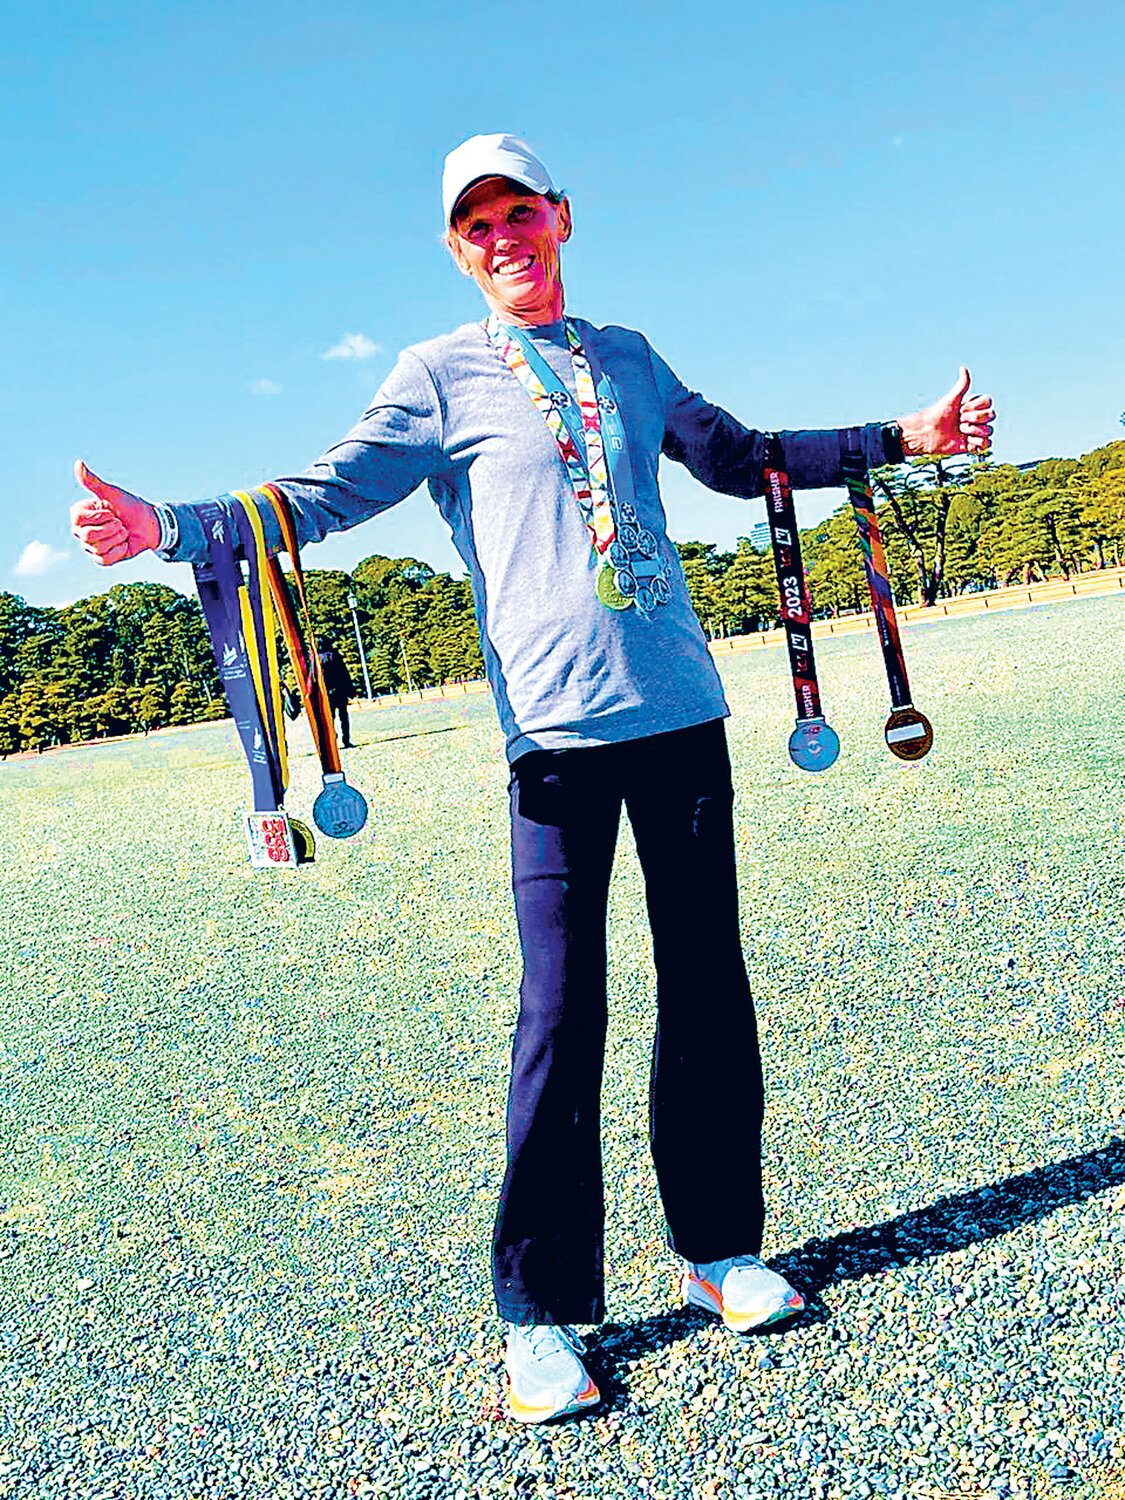 New Britain’s Nancy Smith displays her six world major medals after completing the Tokyo Marathon on March 3.